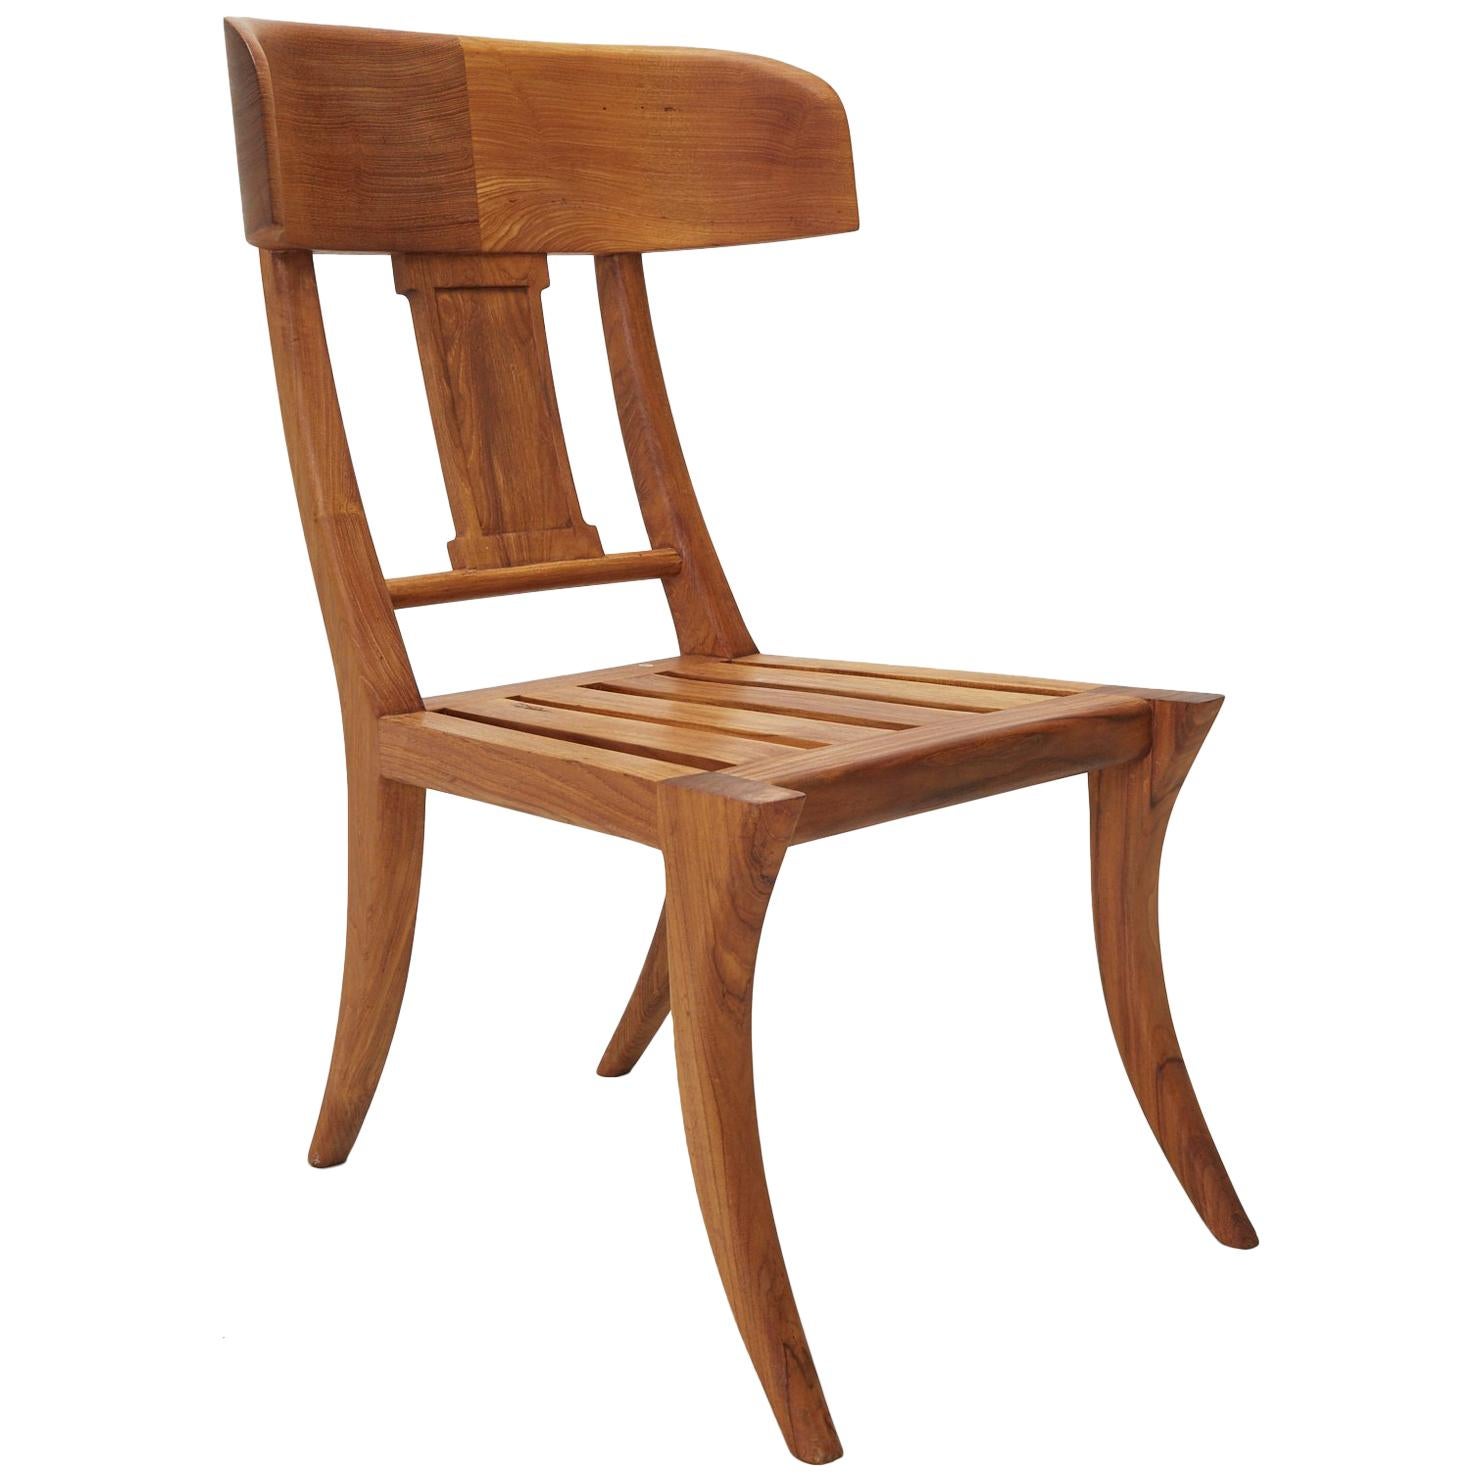 Teak Klismos Side or Dining Chair by Michael Taylor Collections